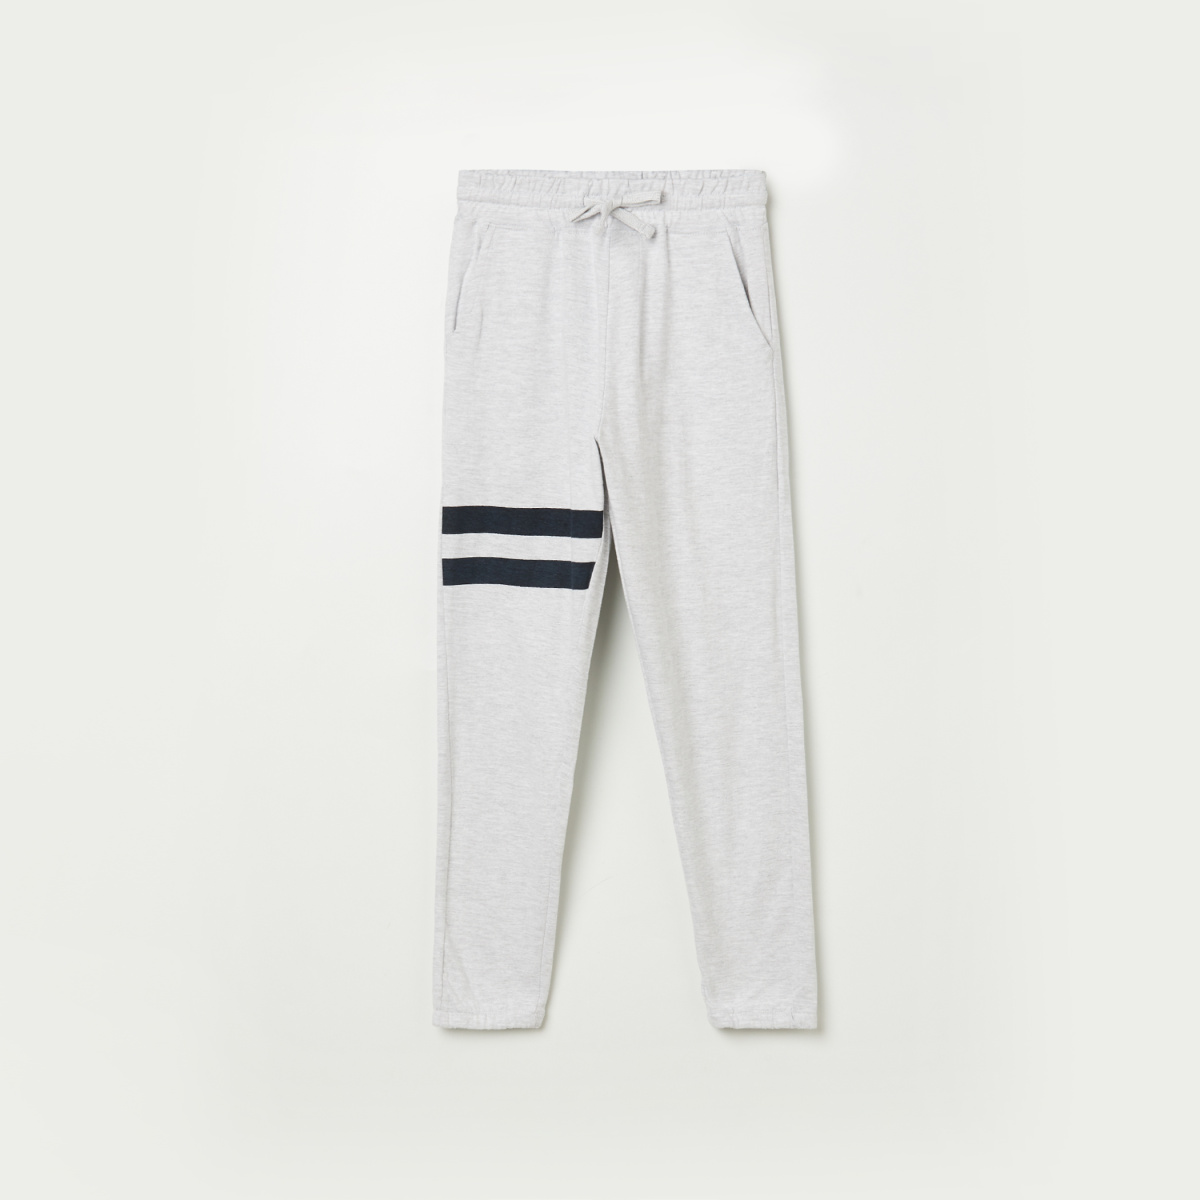 FAME FOREVER YOUNG Boys Striped Elasticated Track Pants